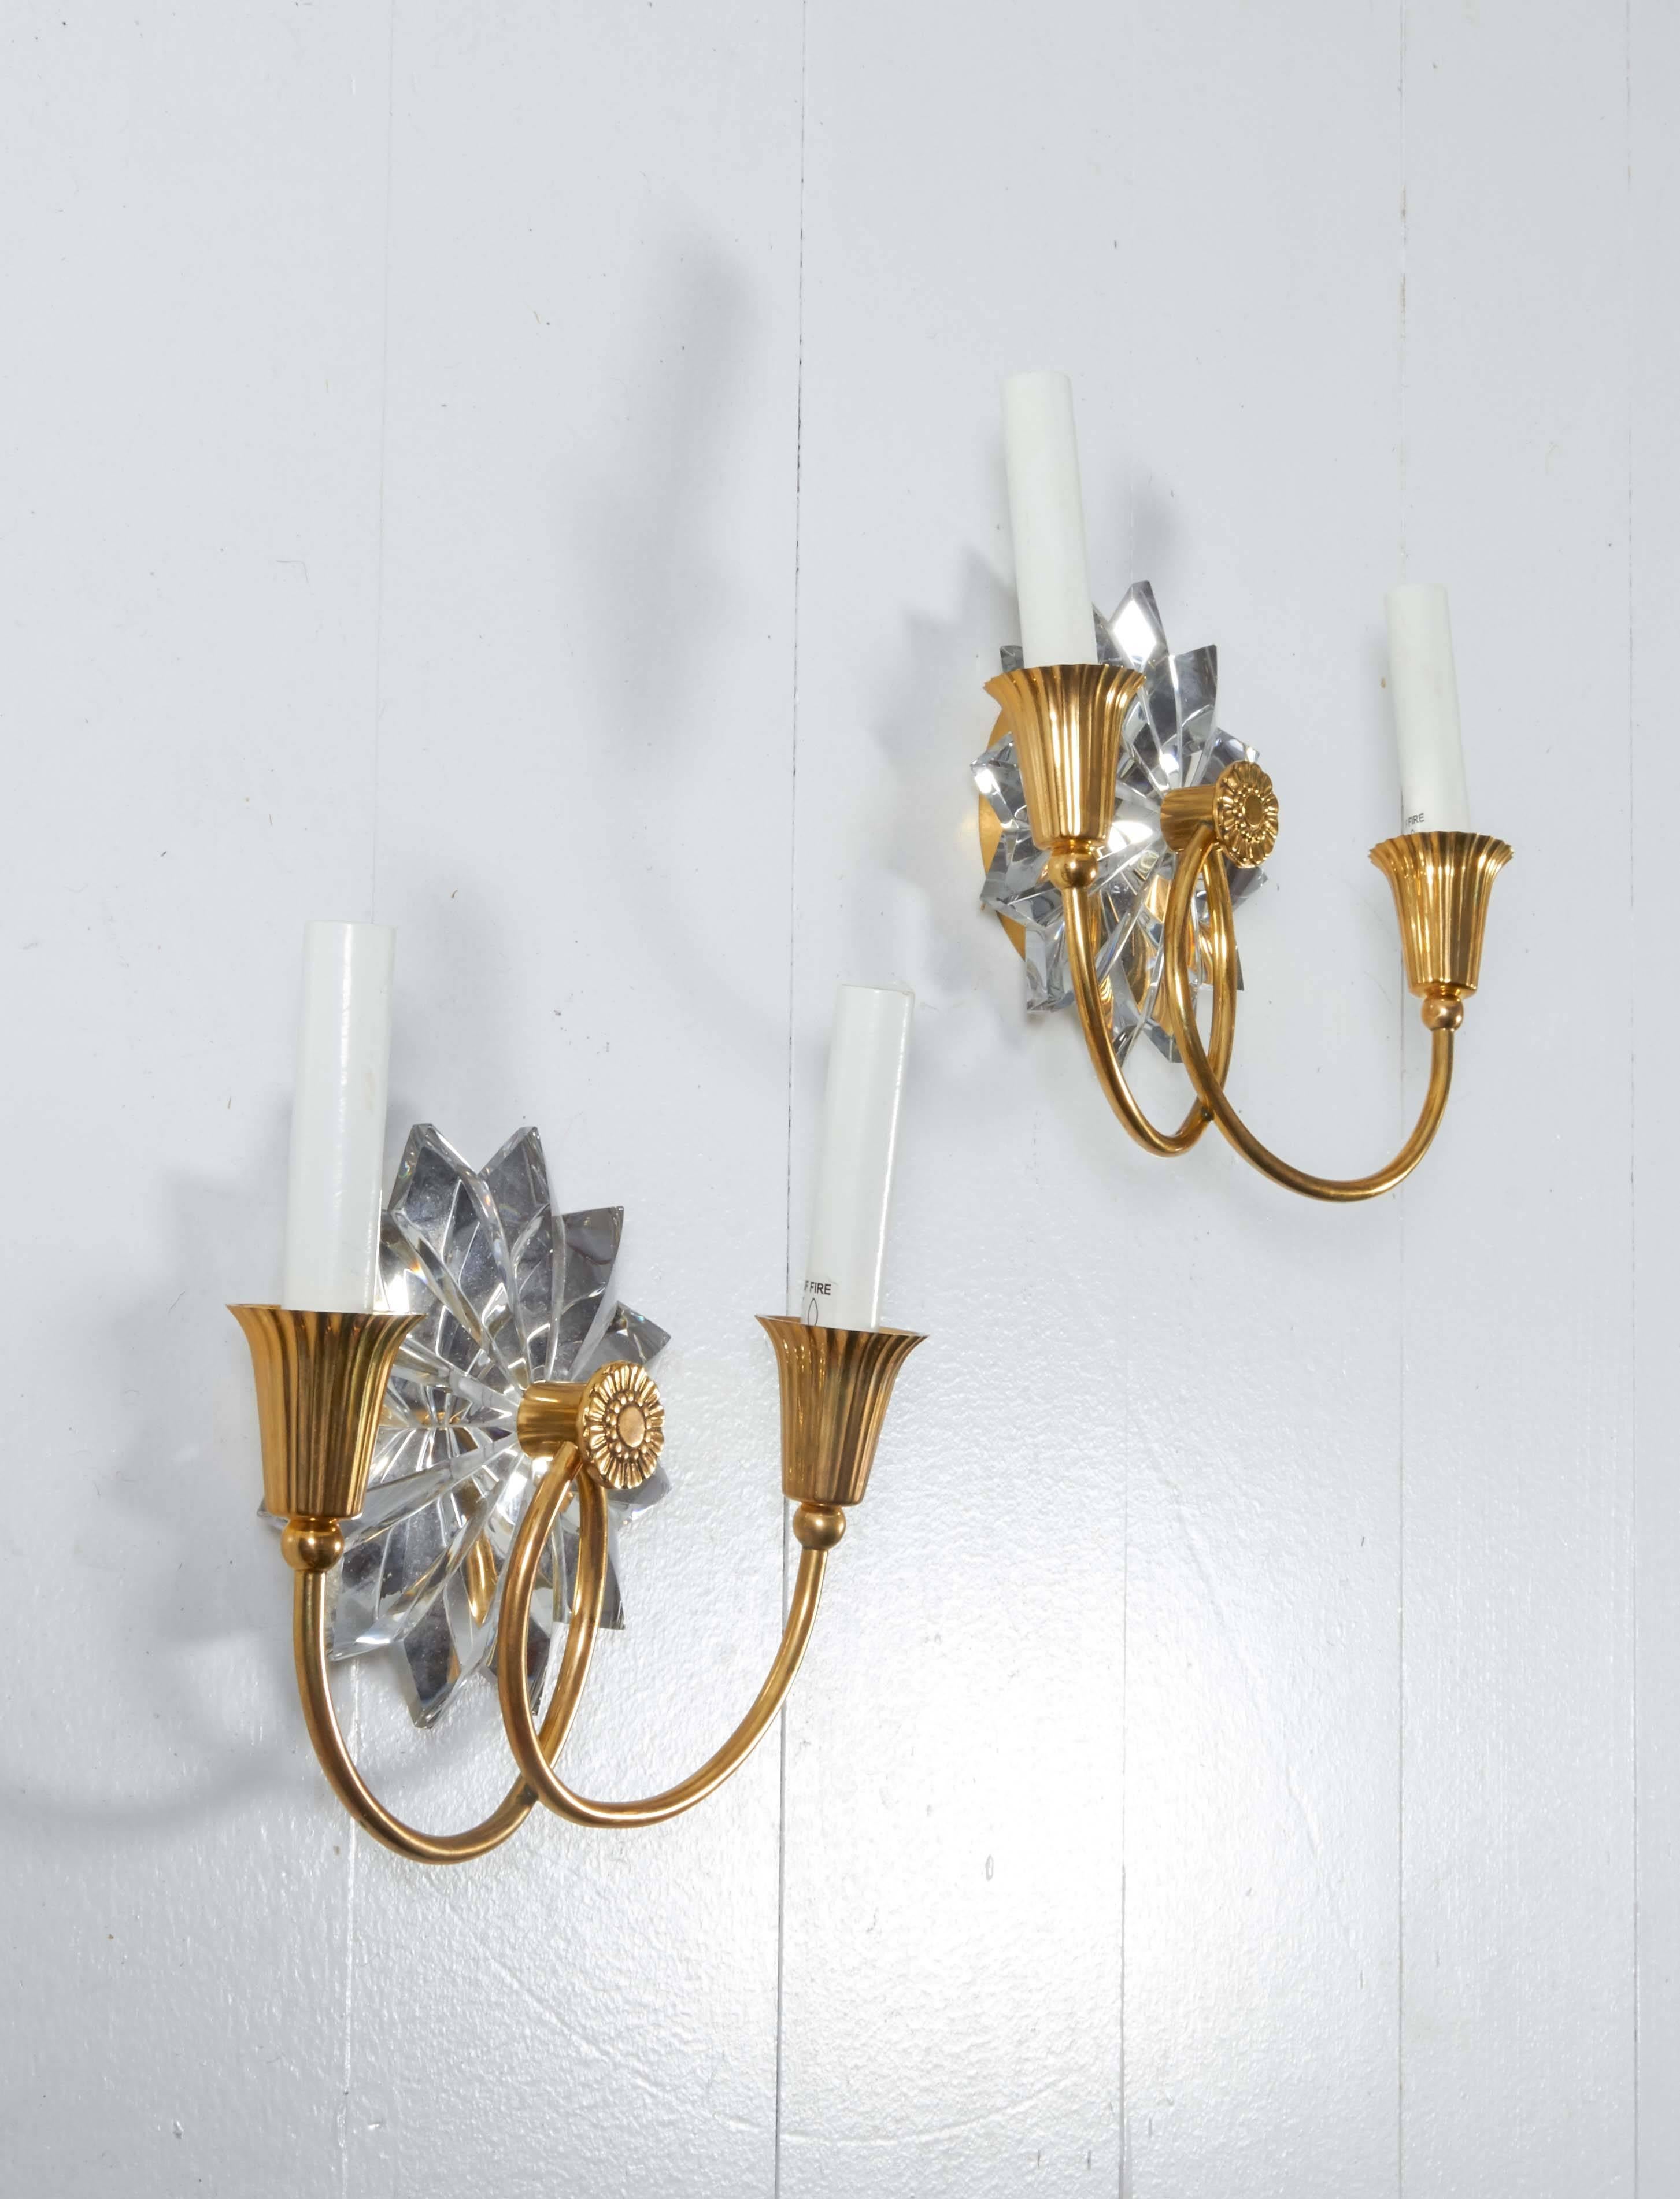 Pair of brass and crystal sconces. The multi-point star motif is an American legacy. The sconce has a twenty-four wedged facets from a solid crystal block. Arms are brass plated. Shades are not included.

Not available for sale or to ship in the